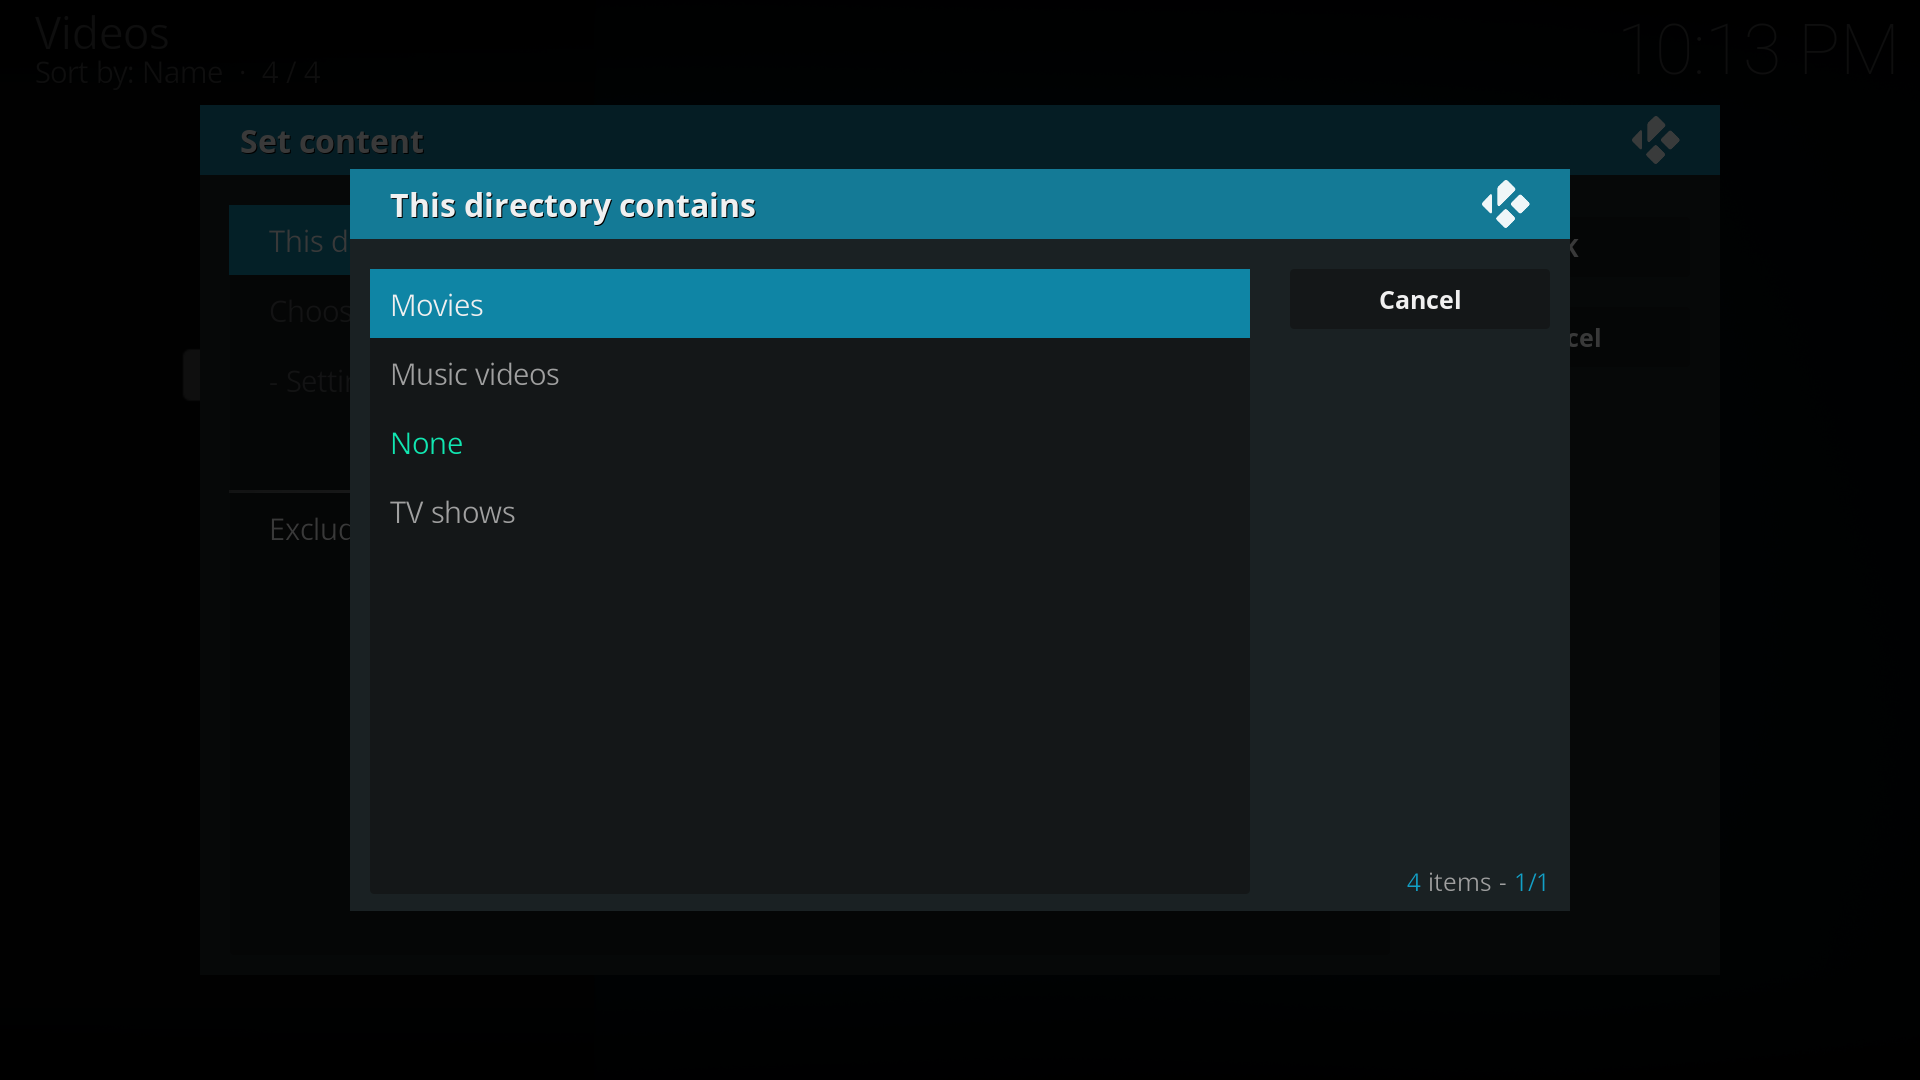 Step 6: The set content window will display, this is where you tell Kodi what type of media is in the folder. Select "This directory contains" and in the new window select the media type(in this example movies).